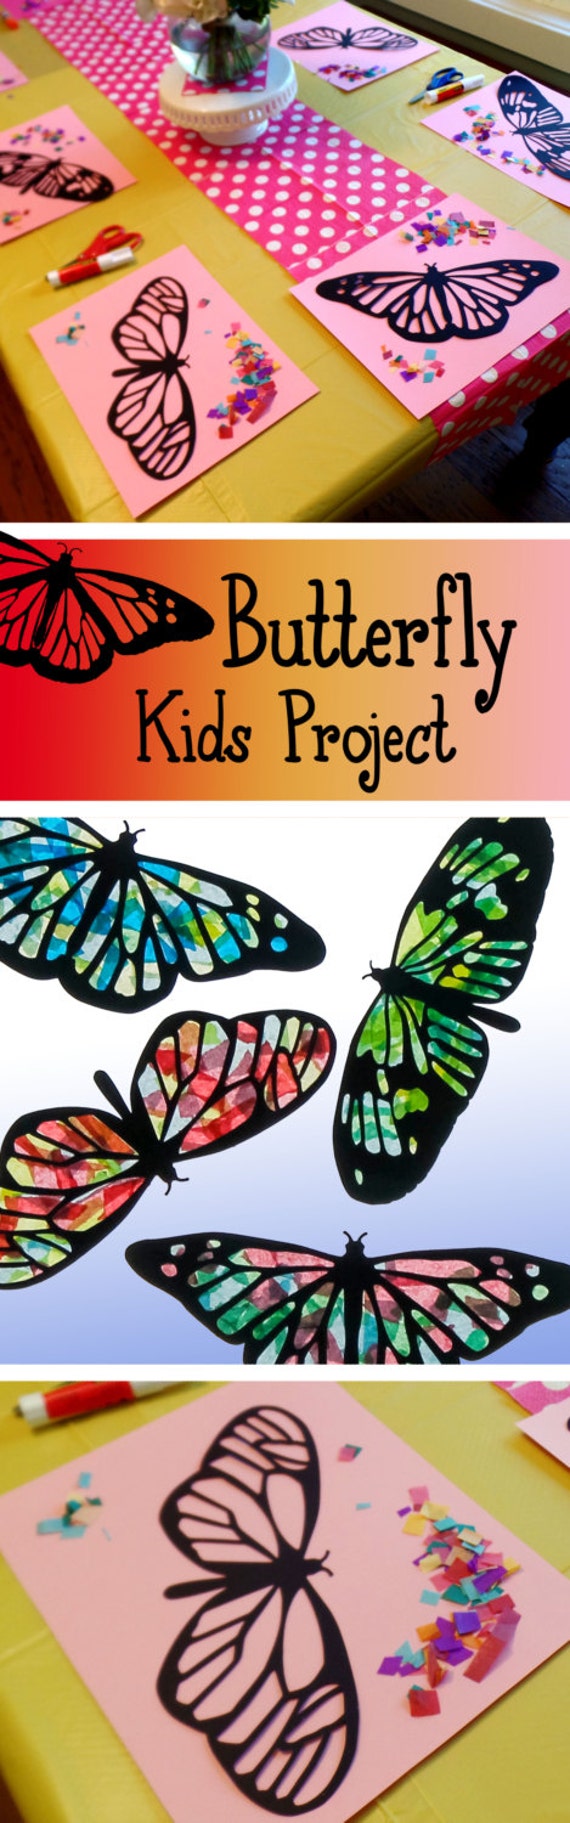 Kids Craft Butterfly Stained Glass Suncatcher Kit with Birds, Bees, Using Tissue paper, Arts and Crafts Kids Activity, project